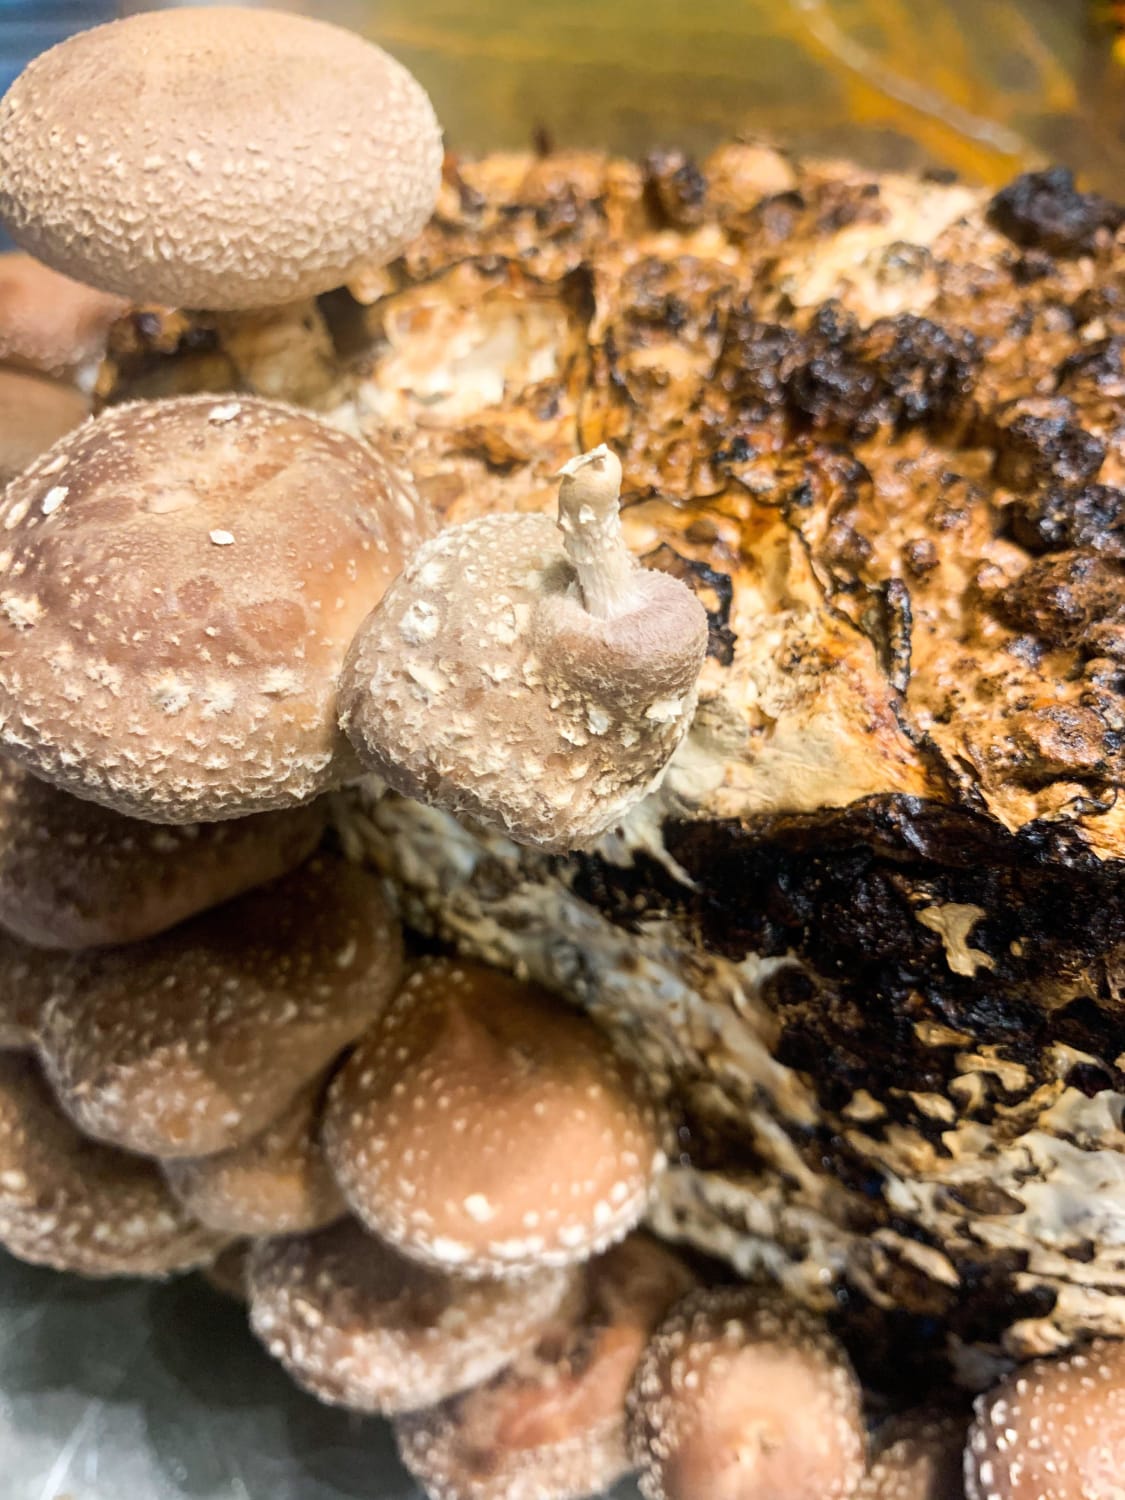 Interesting little mutation on my shiitake log. I hope it / they continue(s) to develop.